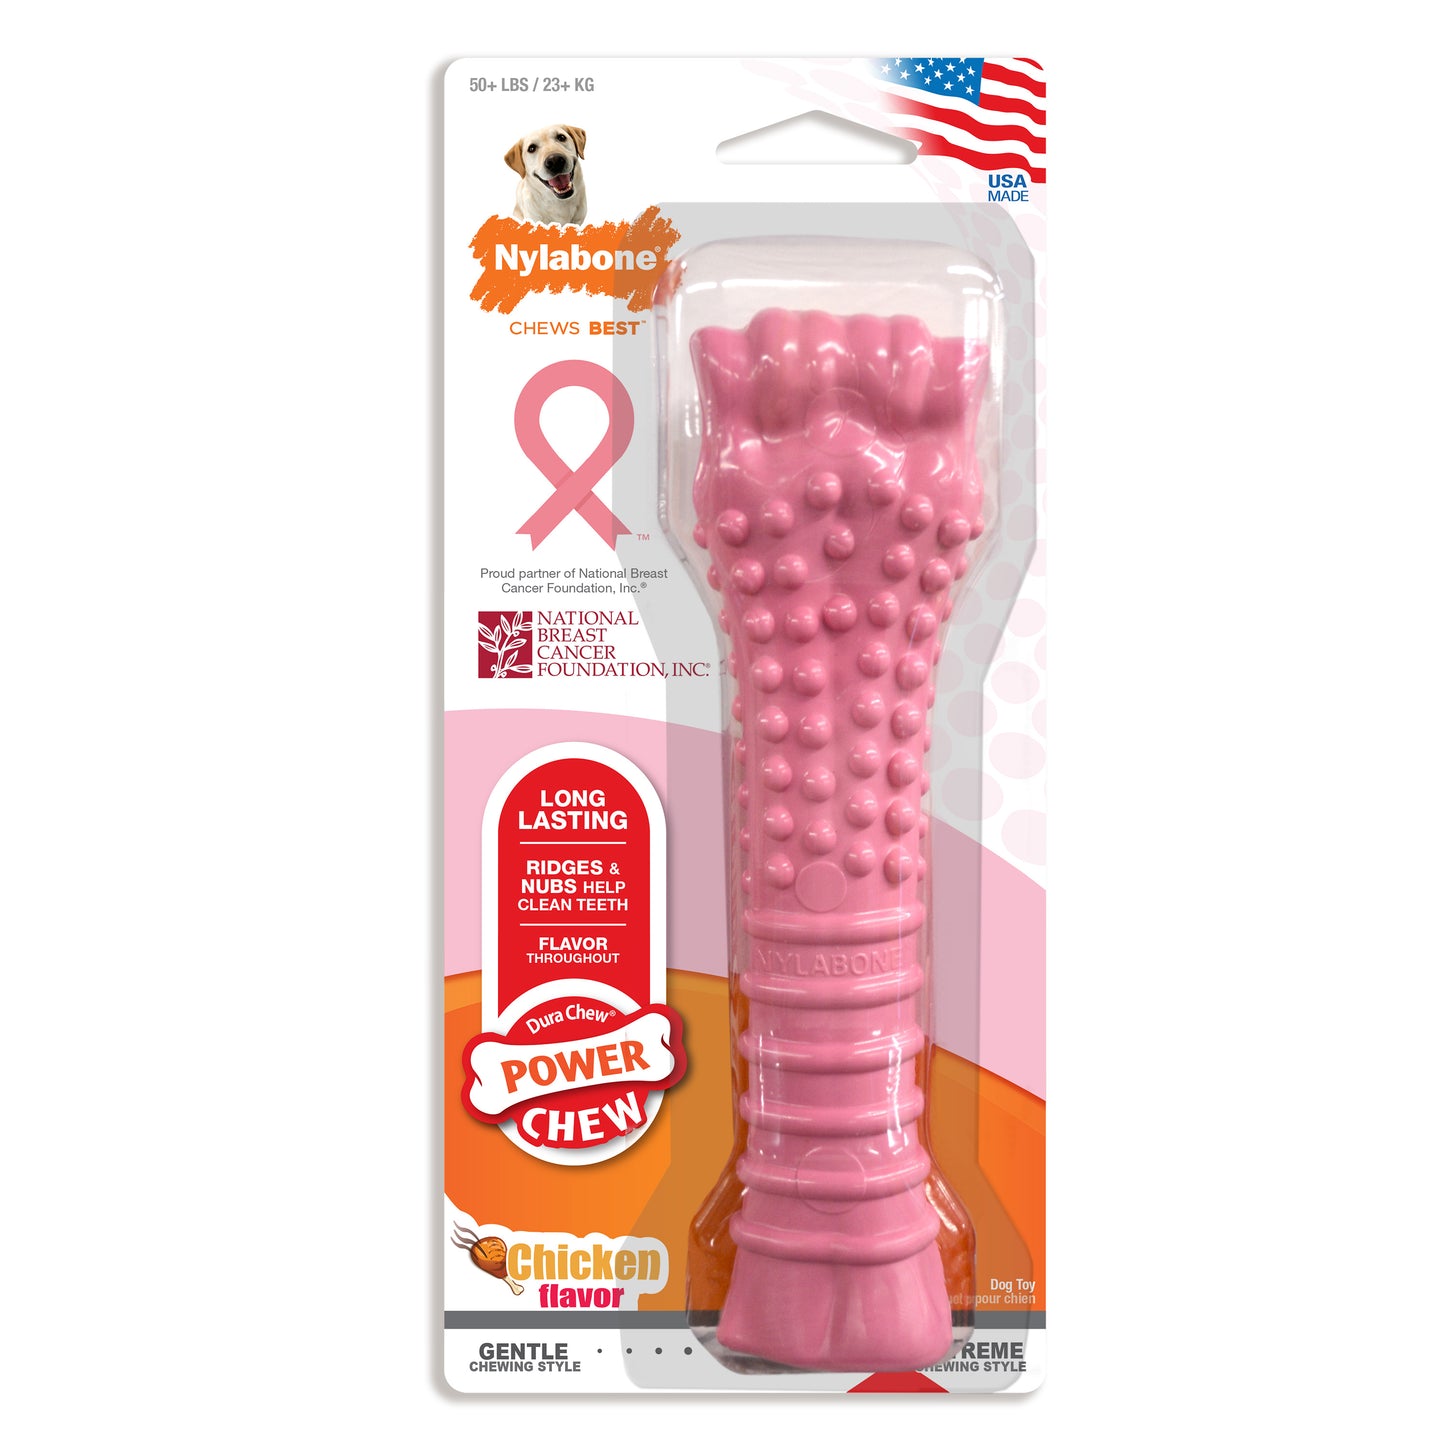 Nylabone Breast Cancer Awareness Pink Power Chew Textured Dog Toy Chicken X-Large/Souper